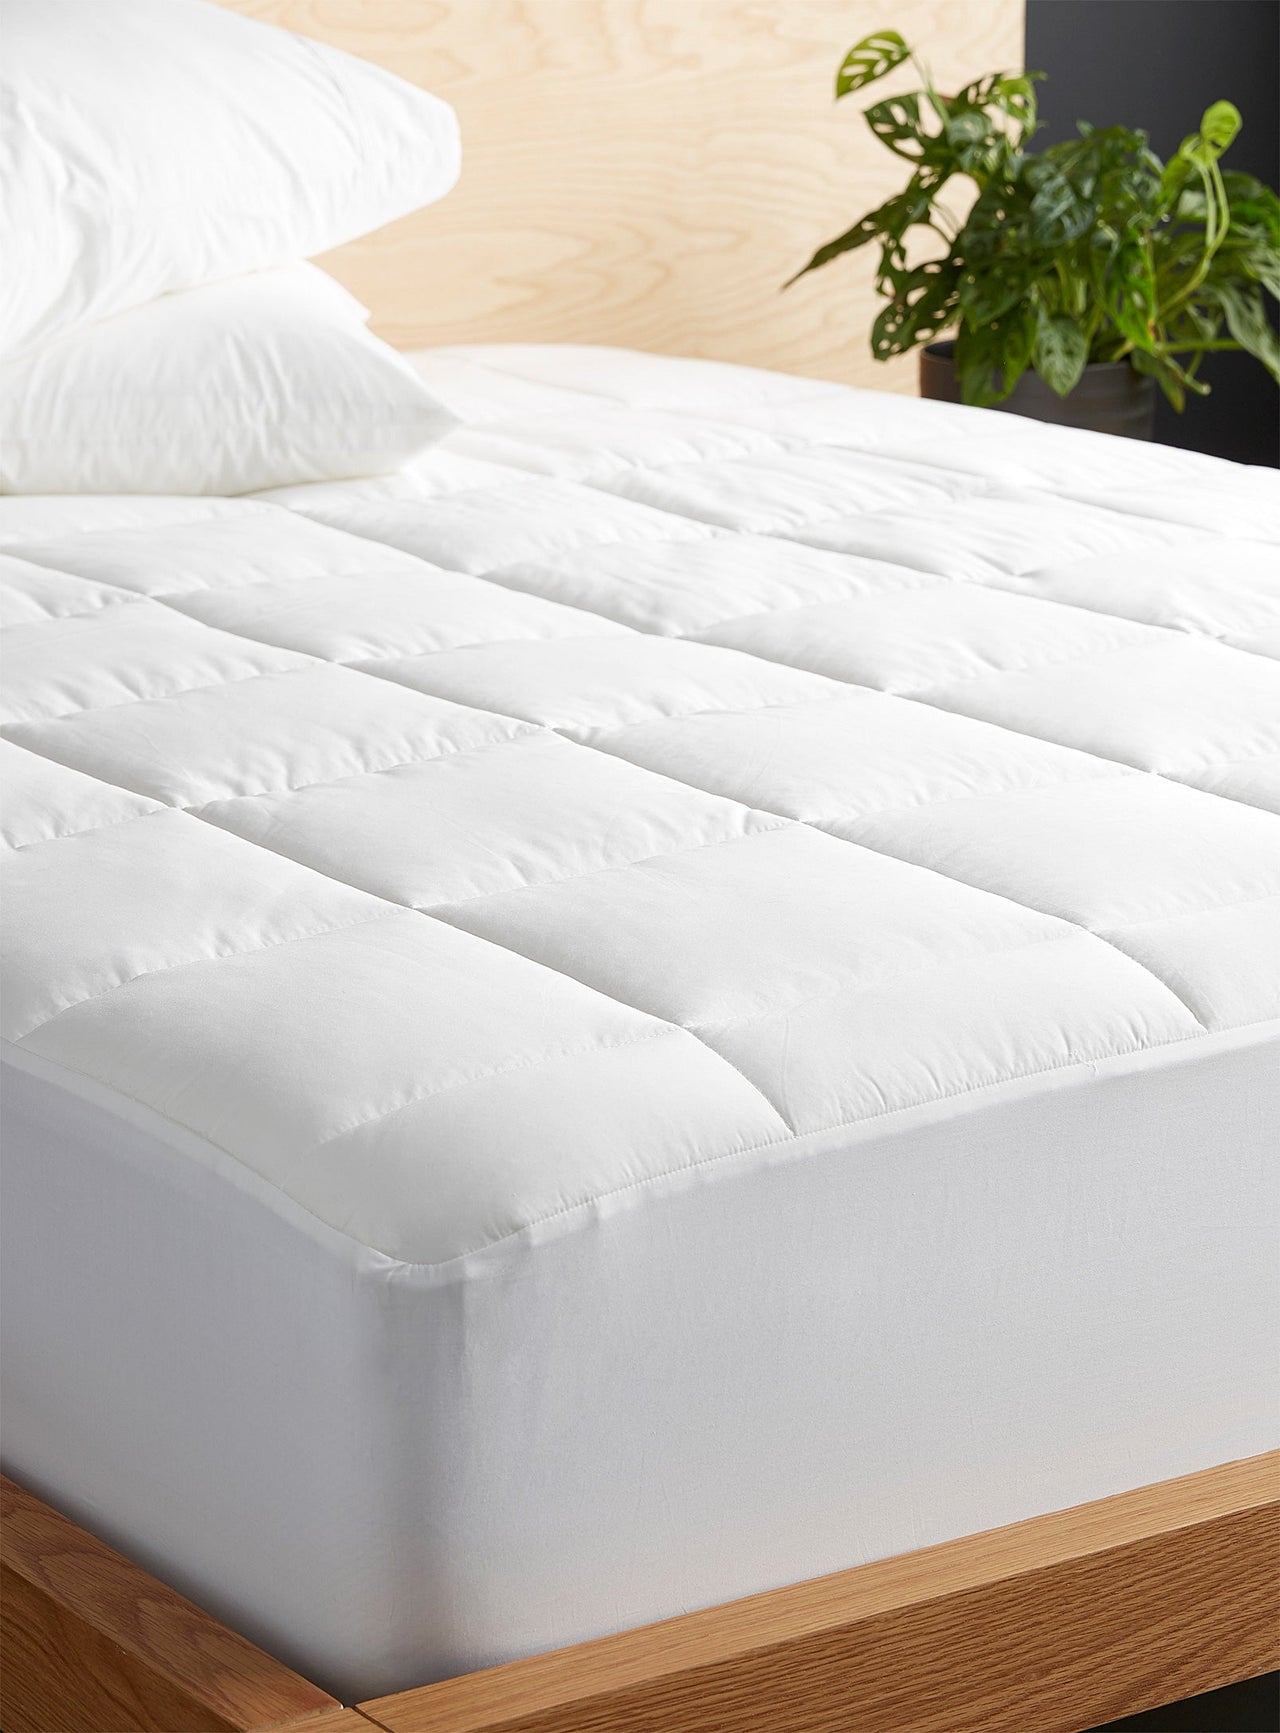 Egyptian cotton and bamboo rayon 330-thread-count mattress protector